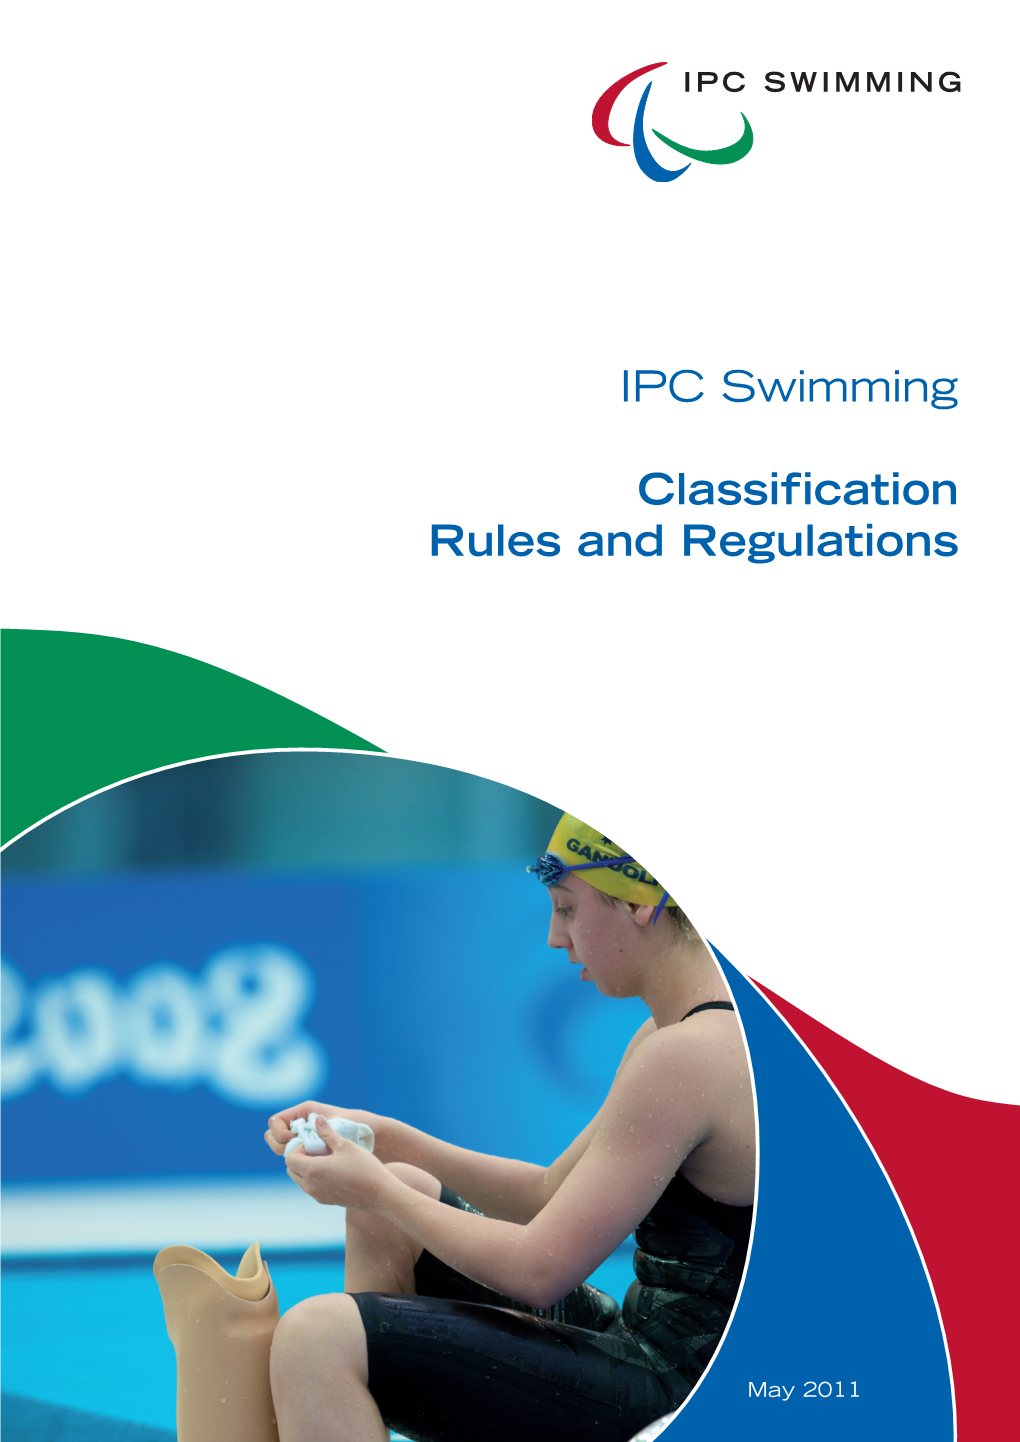 IPC Swimming Classification Rules and Regulations Are Integral Part of the IPC Swimming Rules and Regulations As Applicable